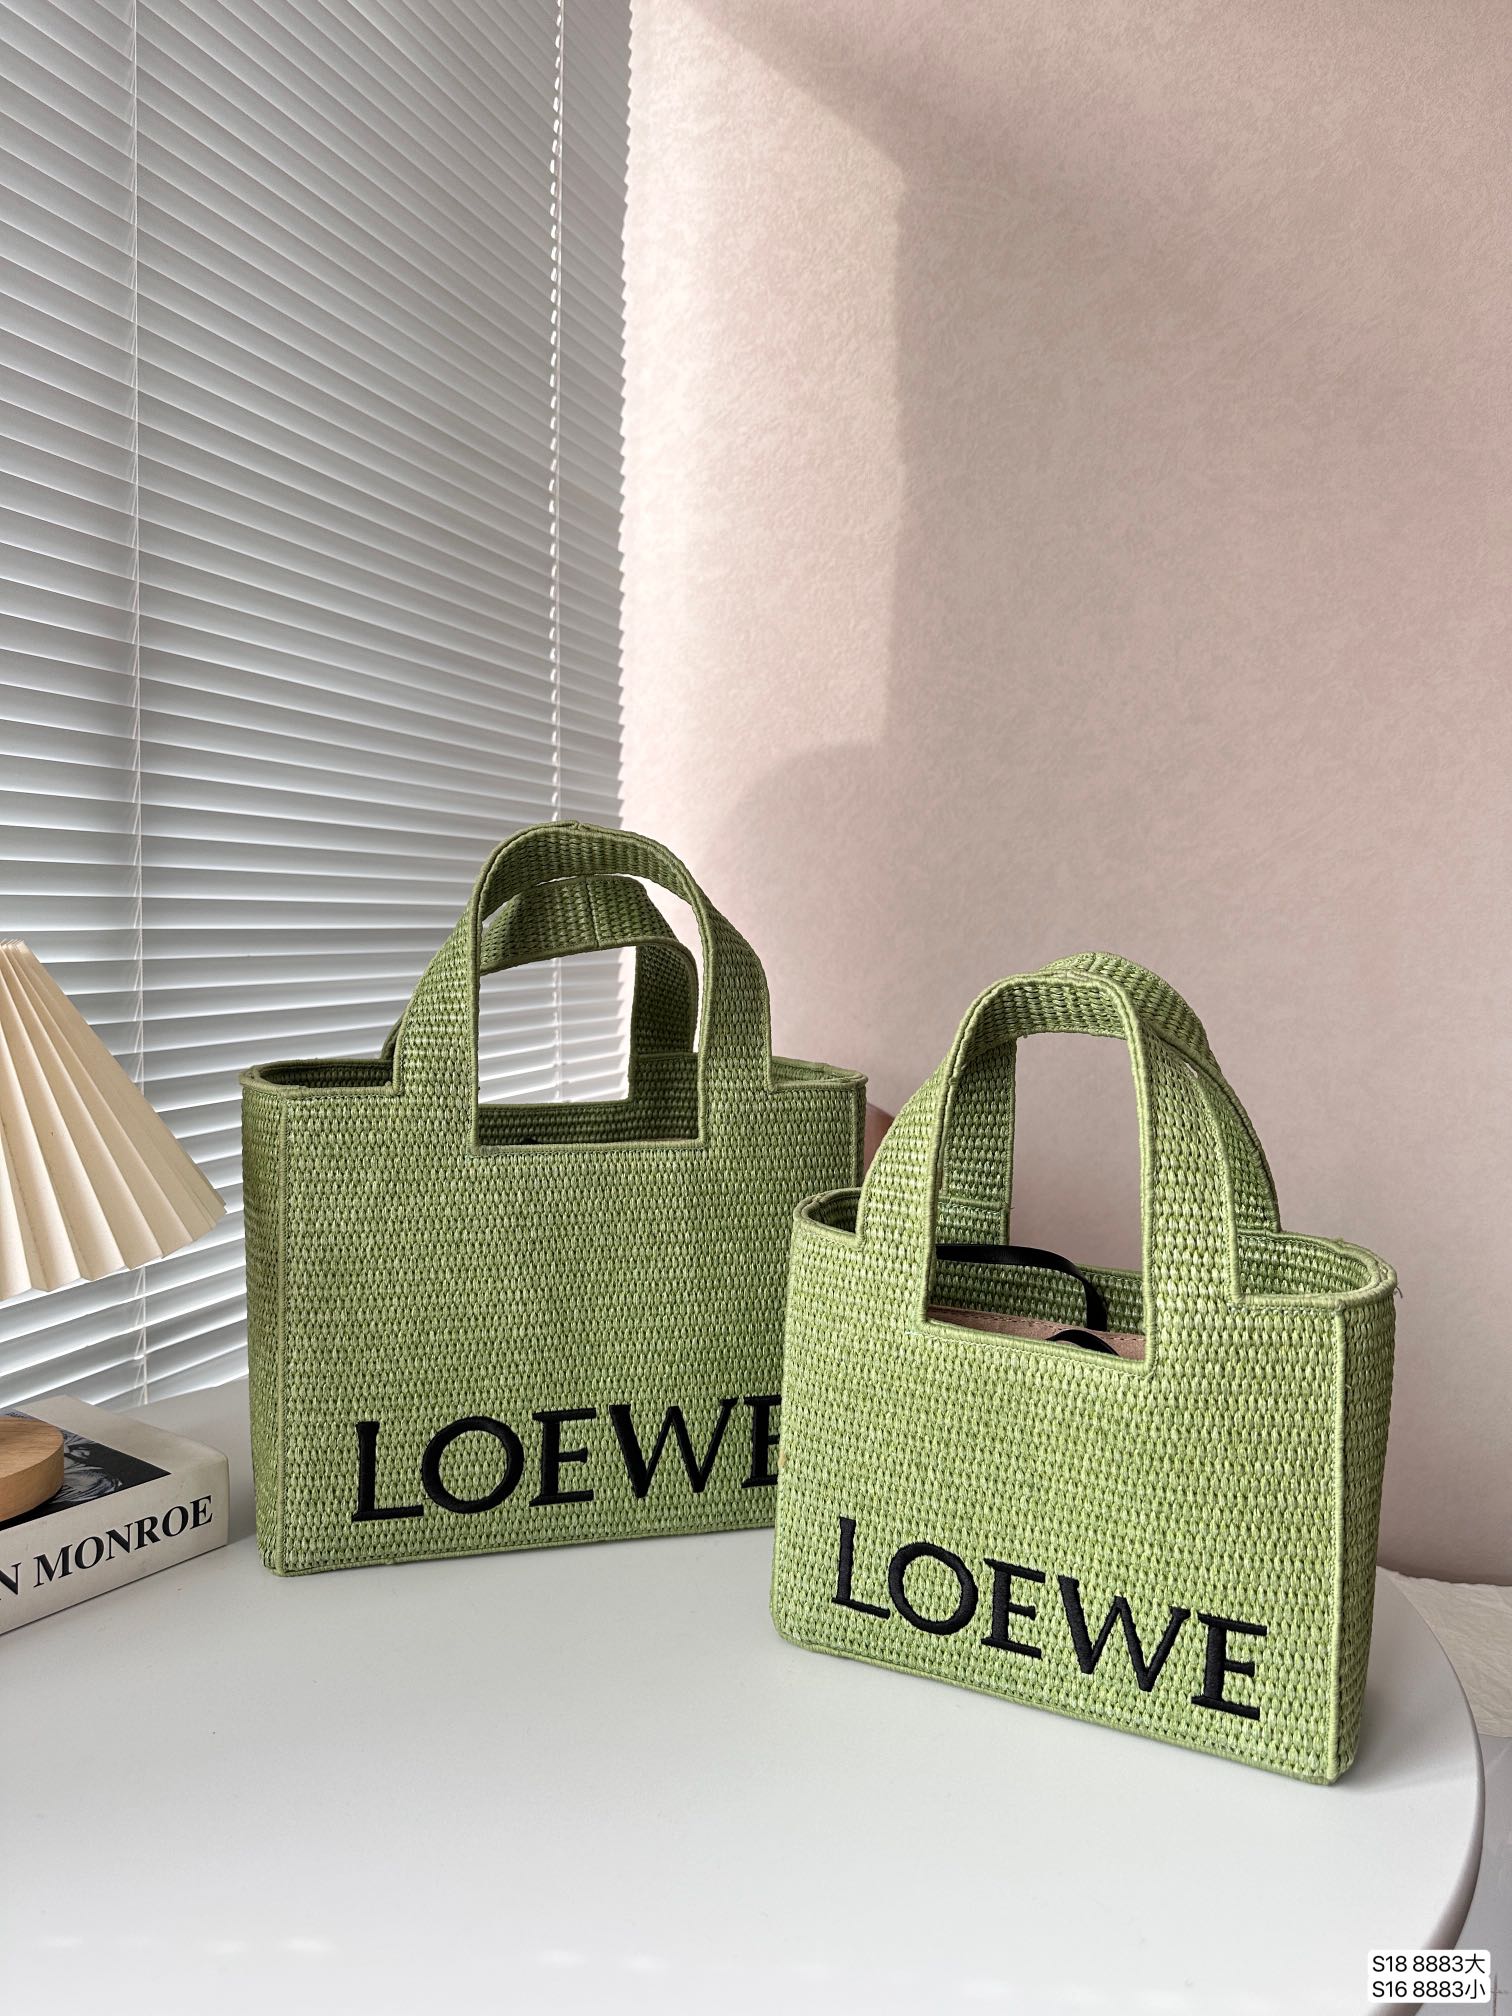 Loewe Tote Bags Weave Straw Woven Summer Collection